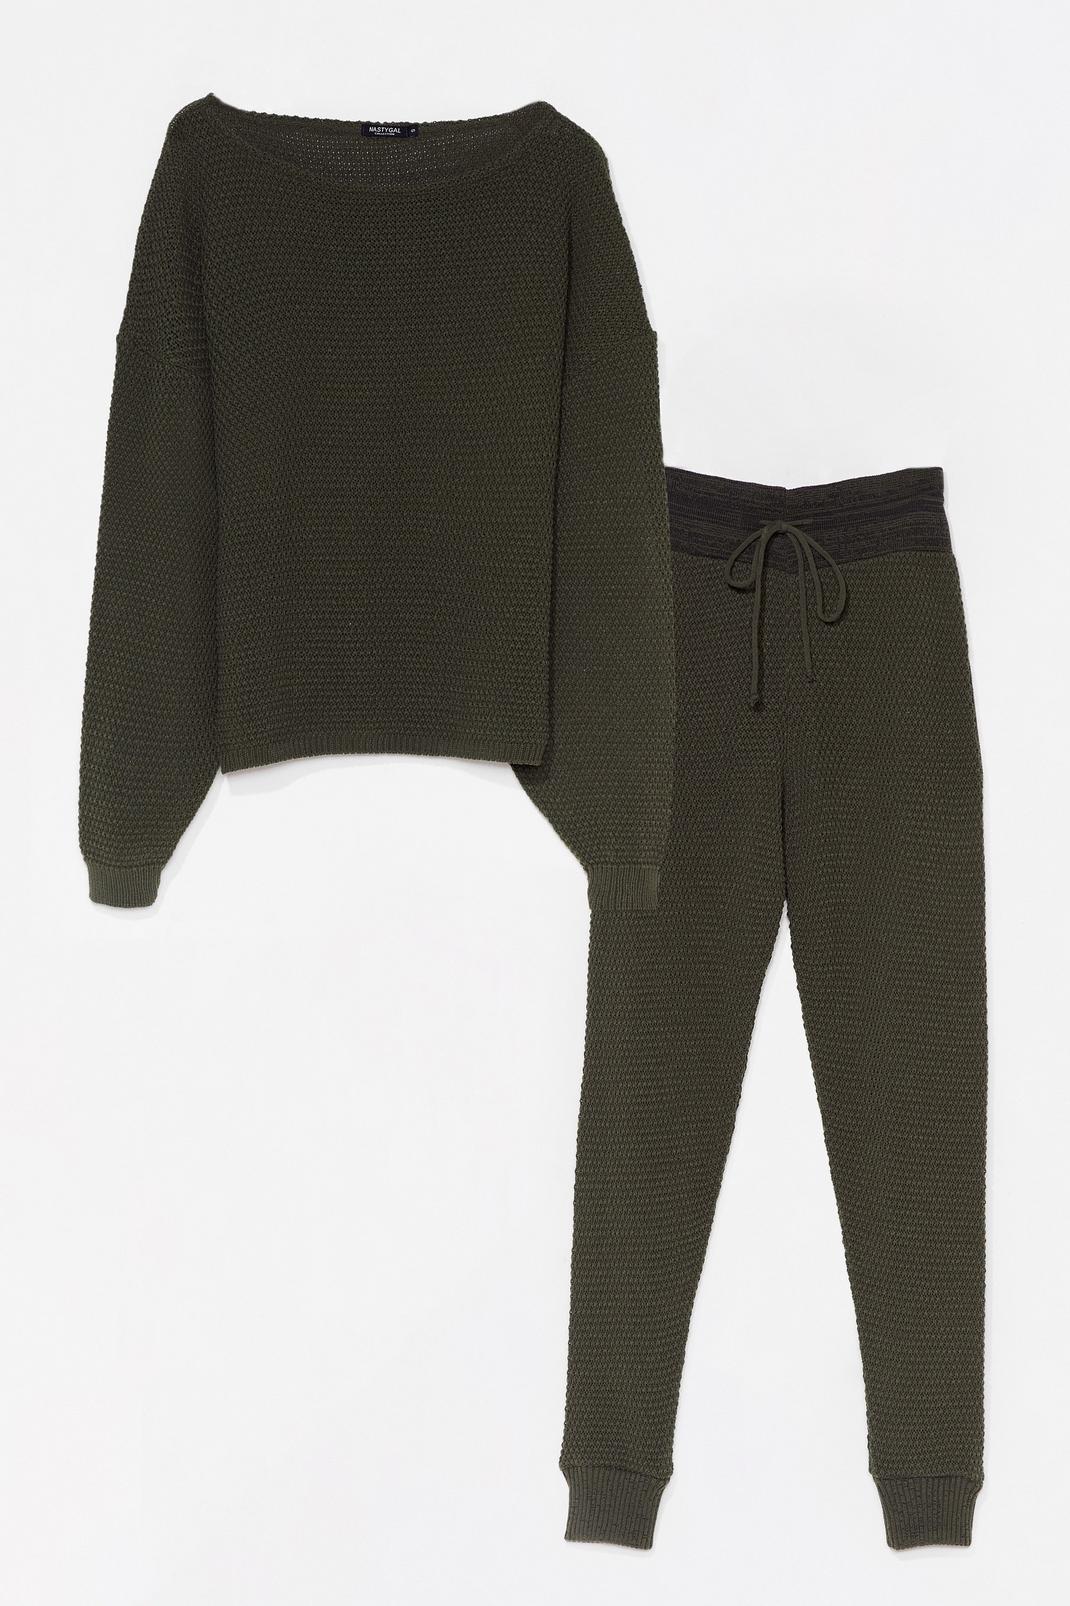 Khaki Knit Off the Shoulder Sweater and Sweatpants Set image number 1